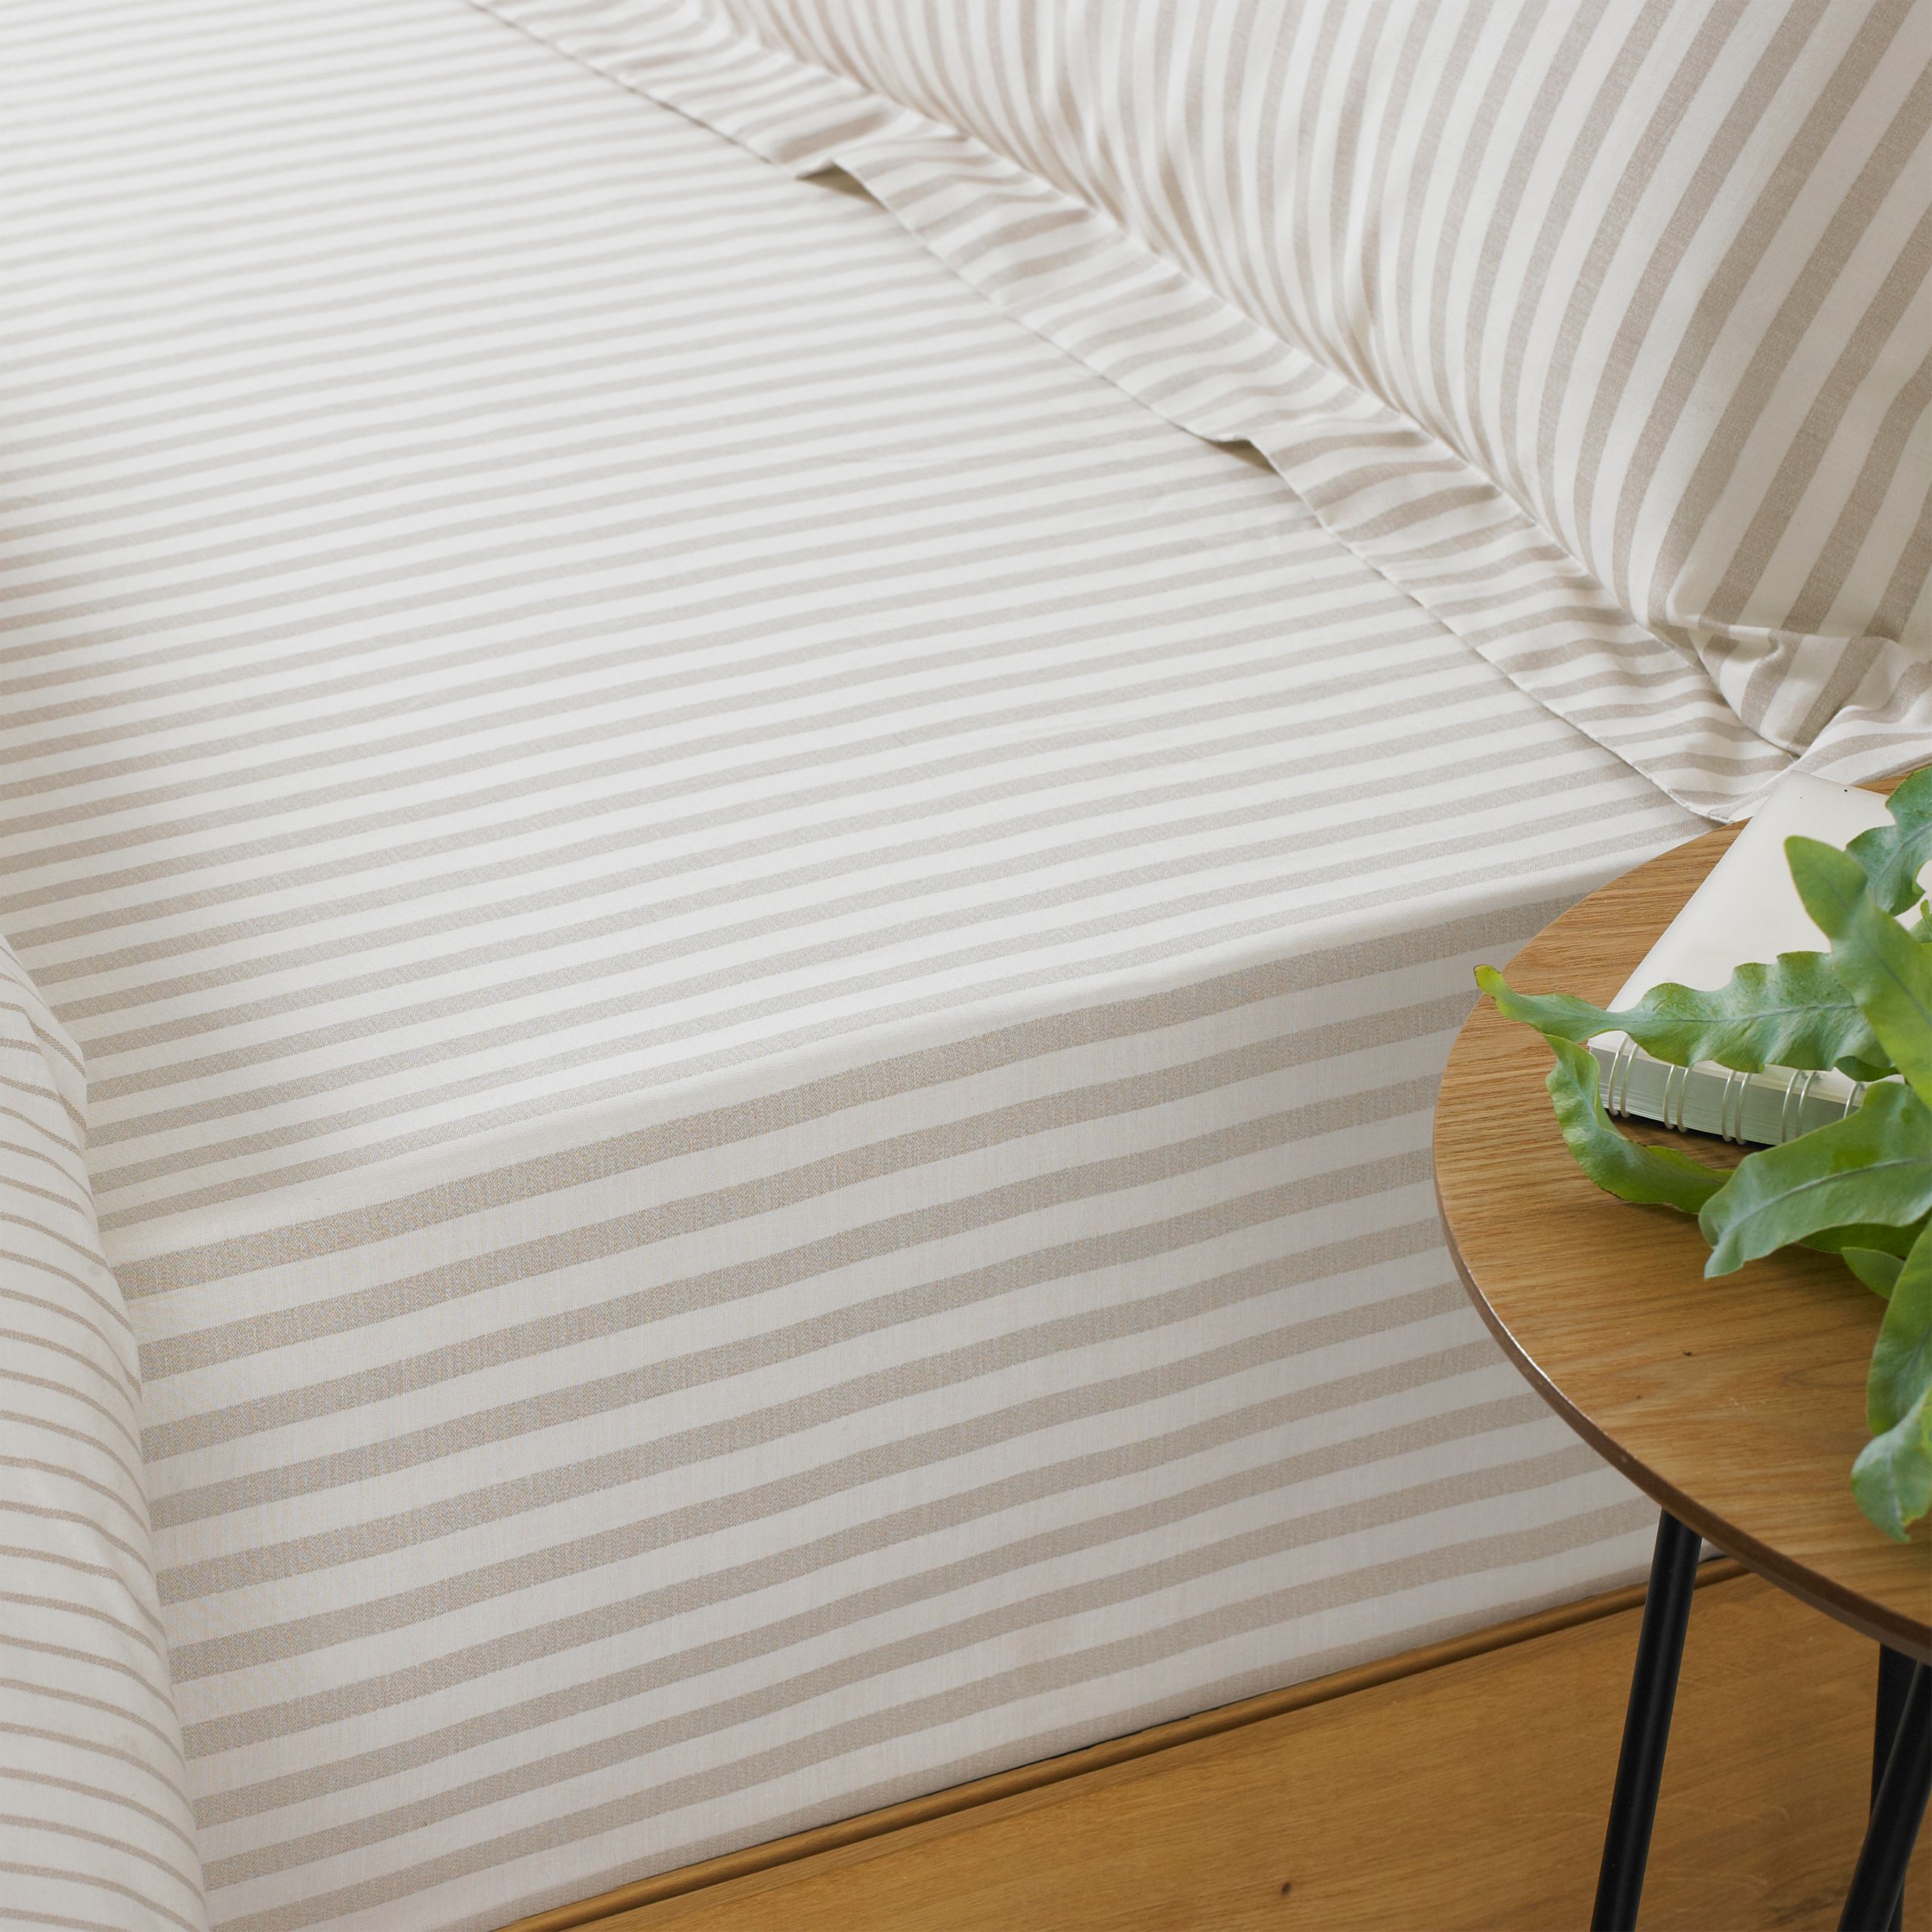 The Hebden fitted sheet features a melange striped design. Made of 100% Cotton and a 144 Thread Count - this fitted sheet has a soft and chrisp feel with a matte finish. Complete with elasticated corners, this sheet is fully machine washable and suitable for iron. Measurements are as below for each size in this range;
Single: 90 x 190cm
Double: 137 x 190cm
King: 150 x 200cm
Super King: 180 x 200cm